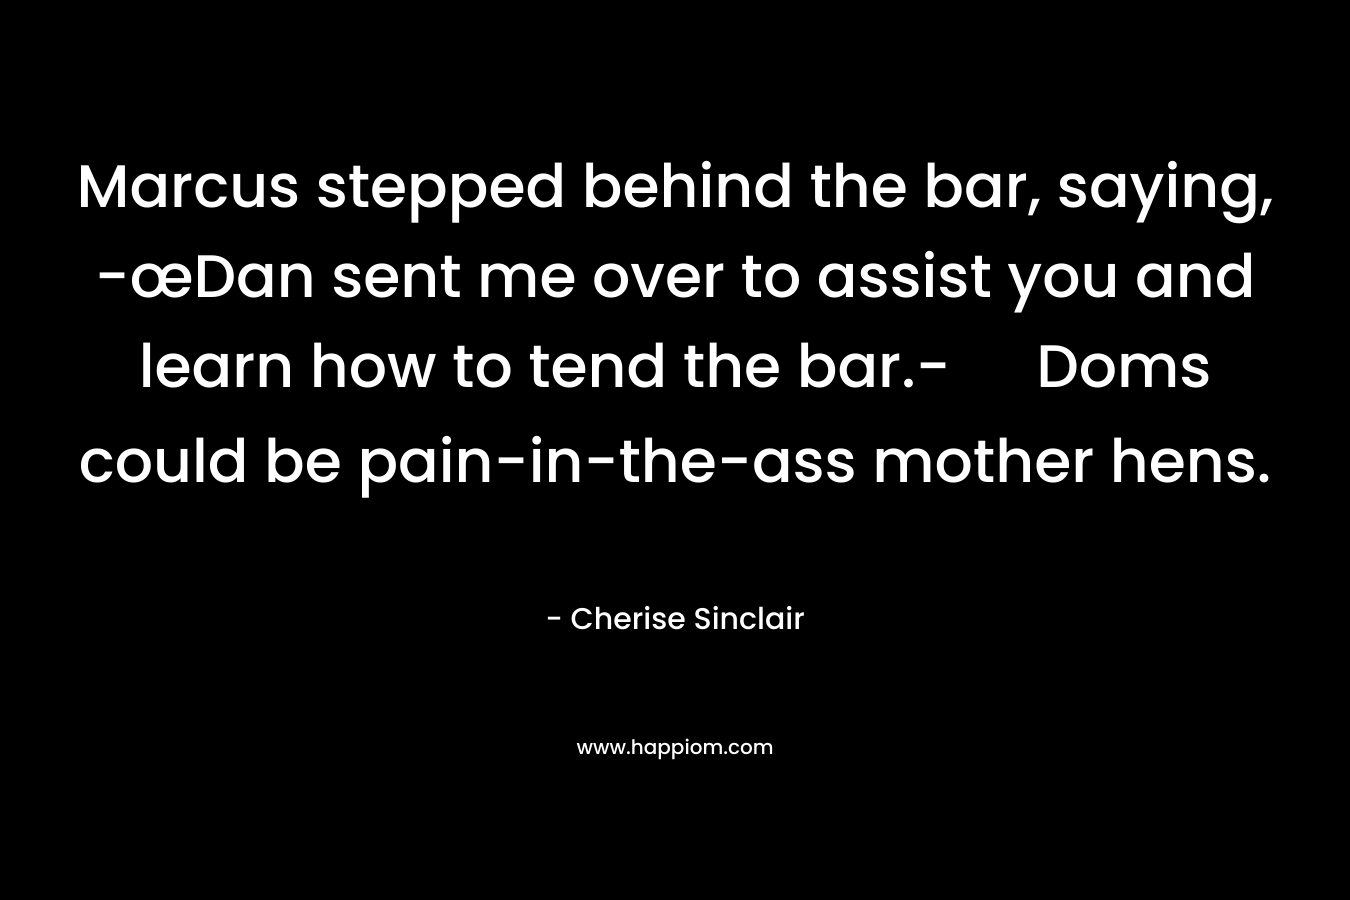 Marcus stepped behind the bar, saying, -œDan sent me over to assist you and learn how to tend the bar.- Doms could be pain-in-the-ass mother hens. – Cherise Sinclair